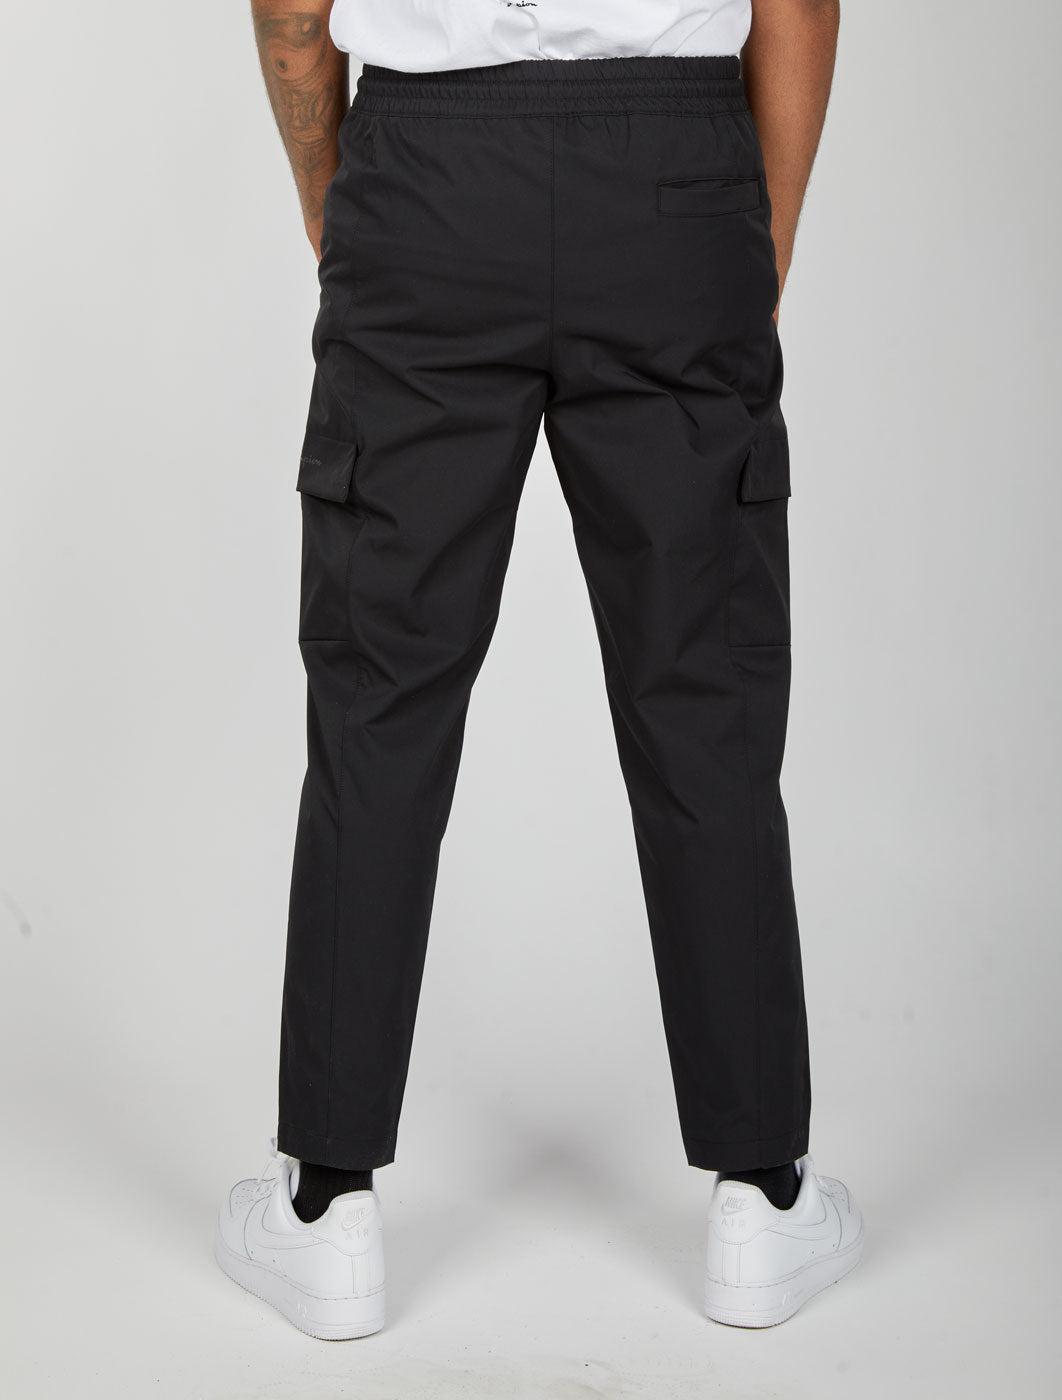 Buy Tenacity Lined Woven Pant online